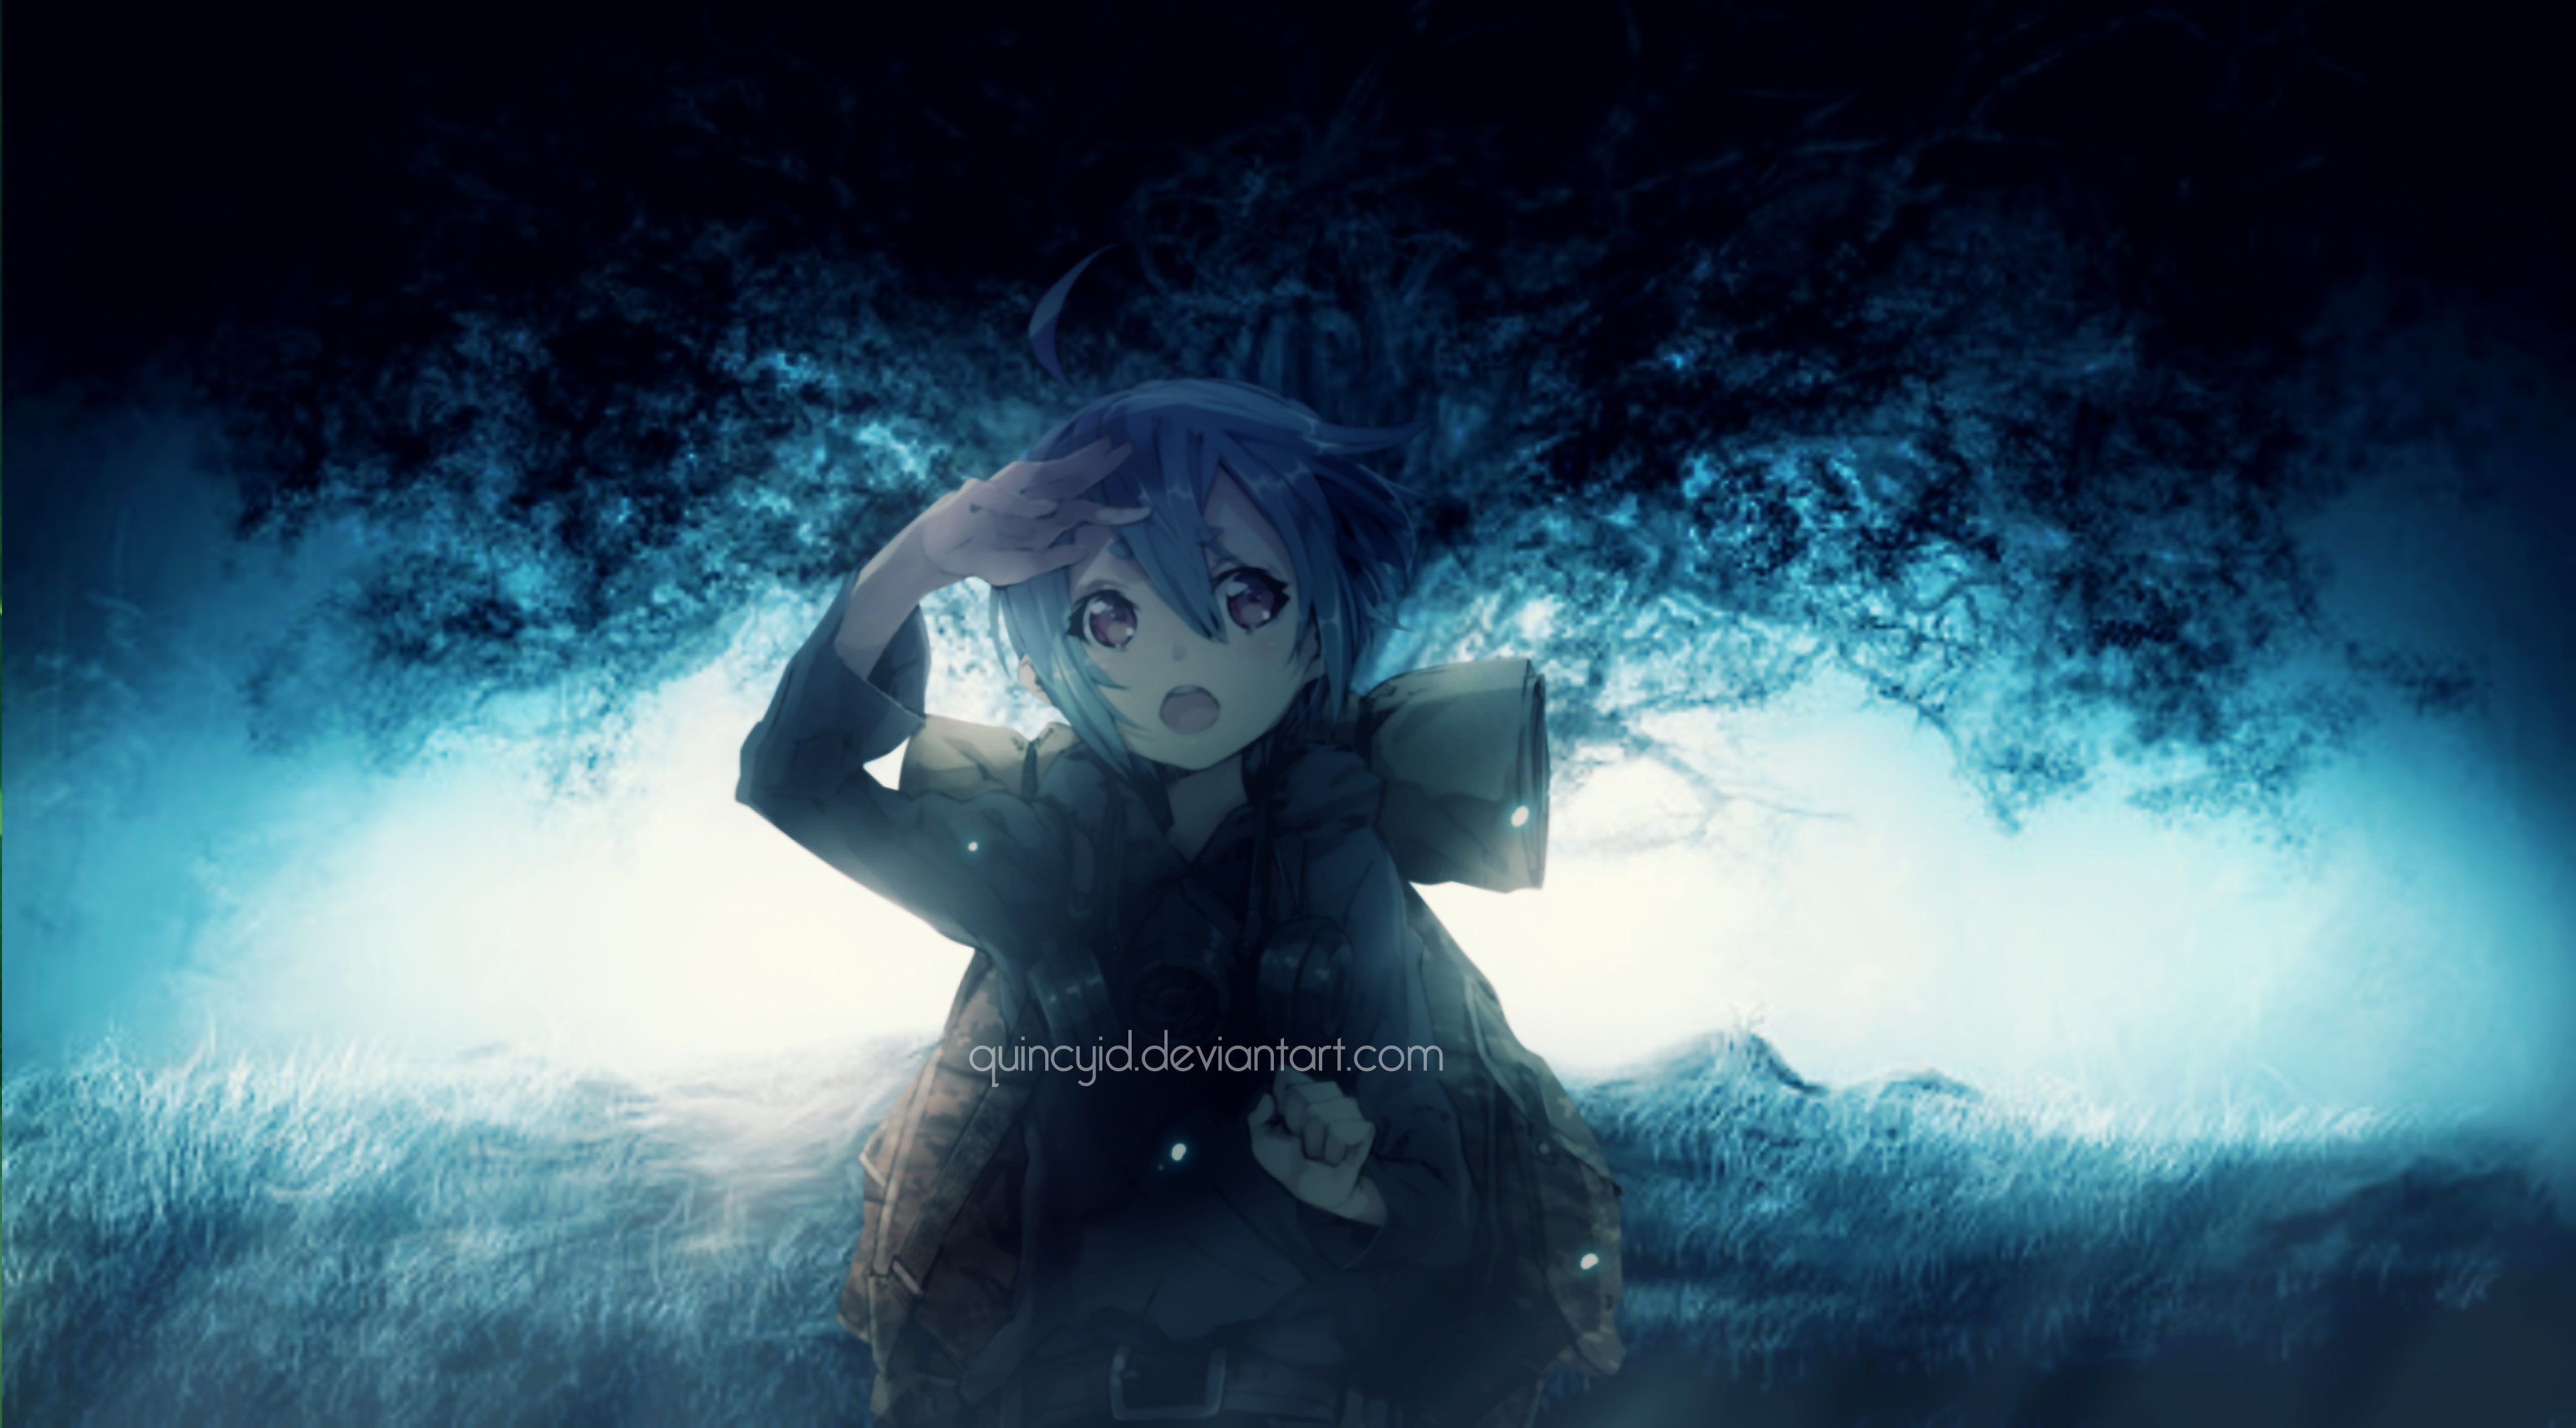 Anime Dark Forest Wallpapers